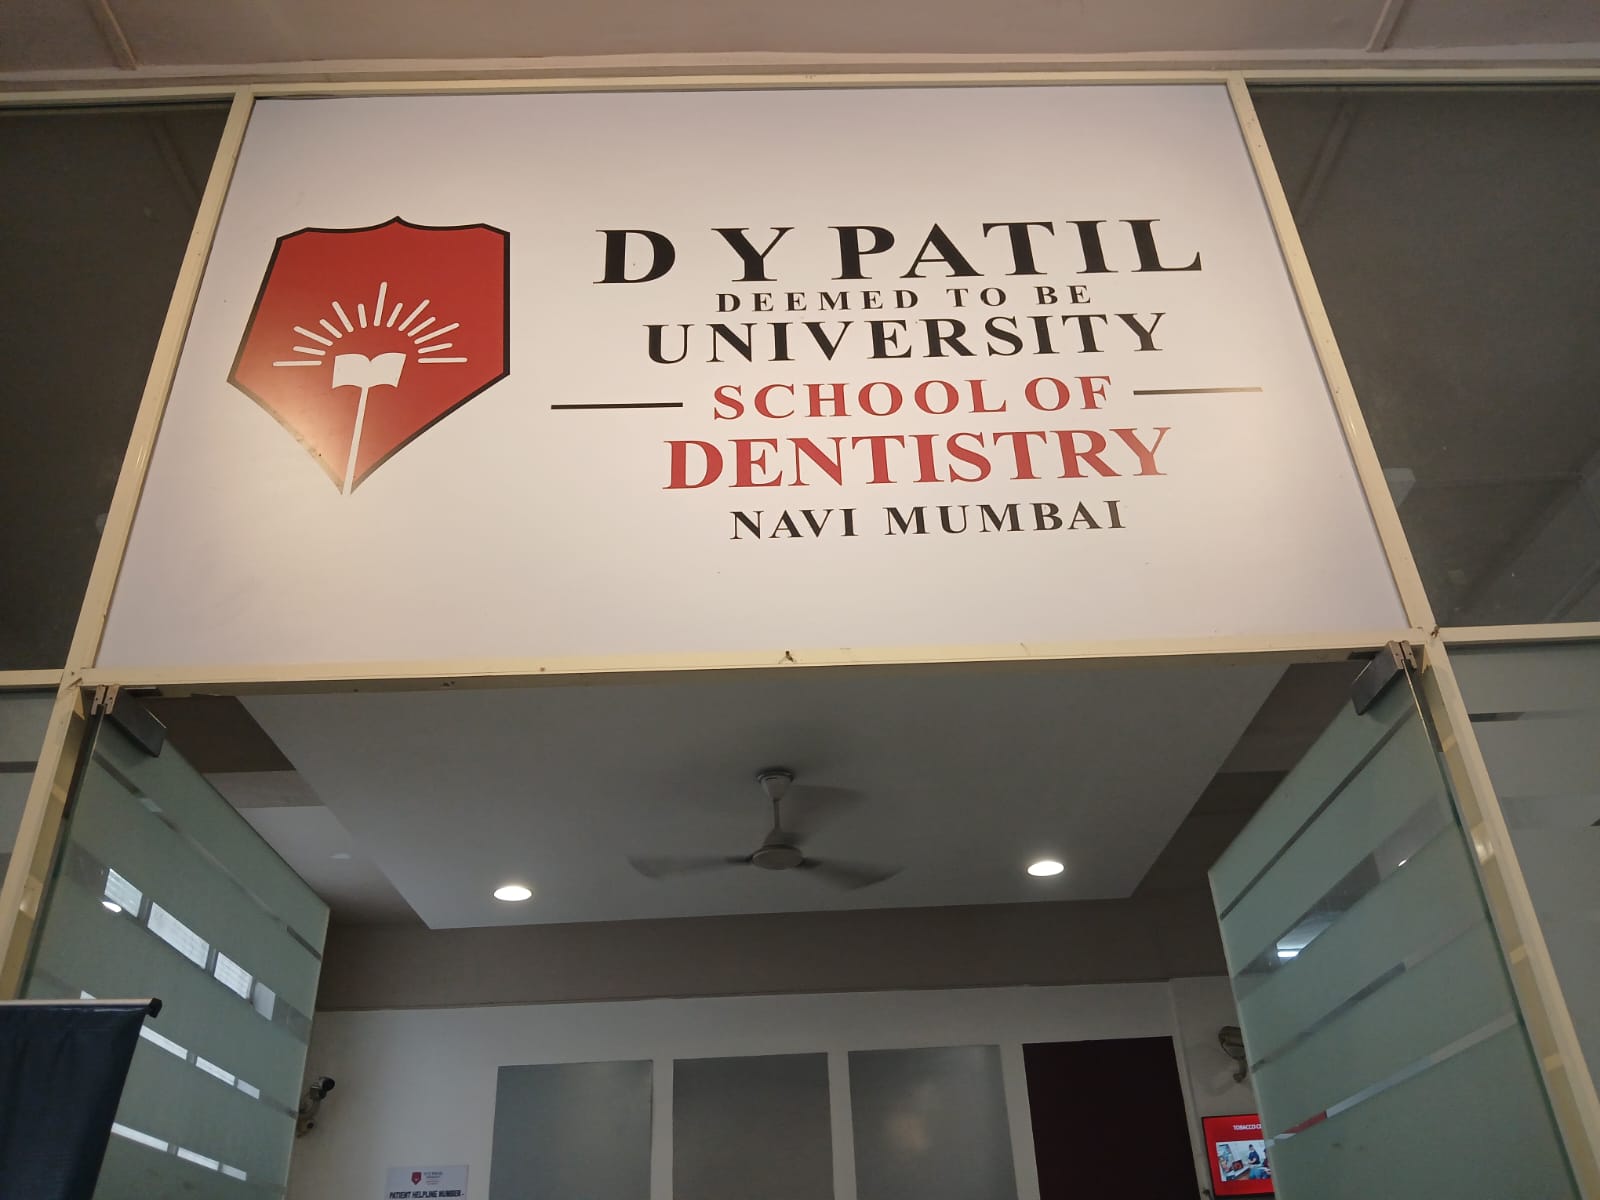 OUR TRAINING PROGRAMME@D Y PATIL DEEMED TO BE UNIVERSITY SCHOOL OF DENTISTRY NAVI MUMBAI